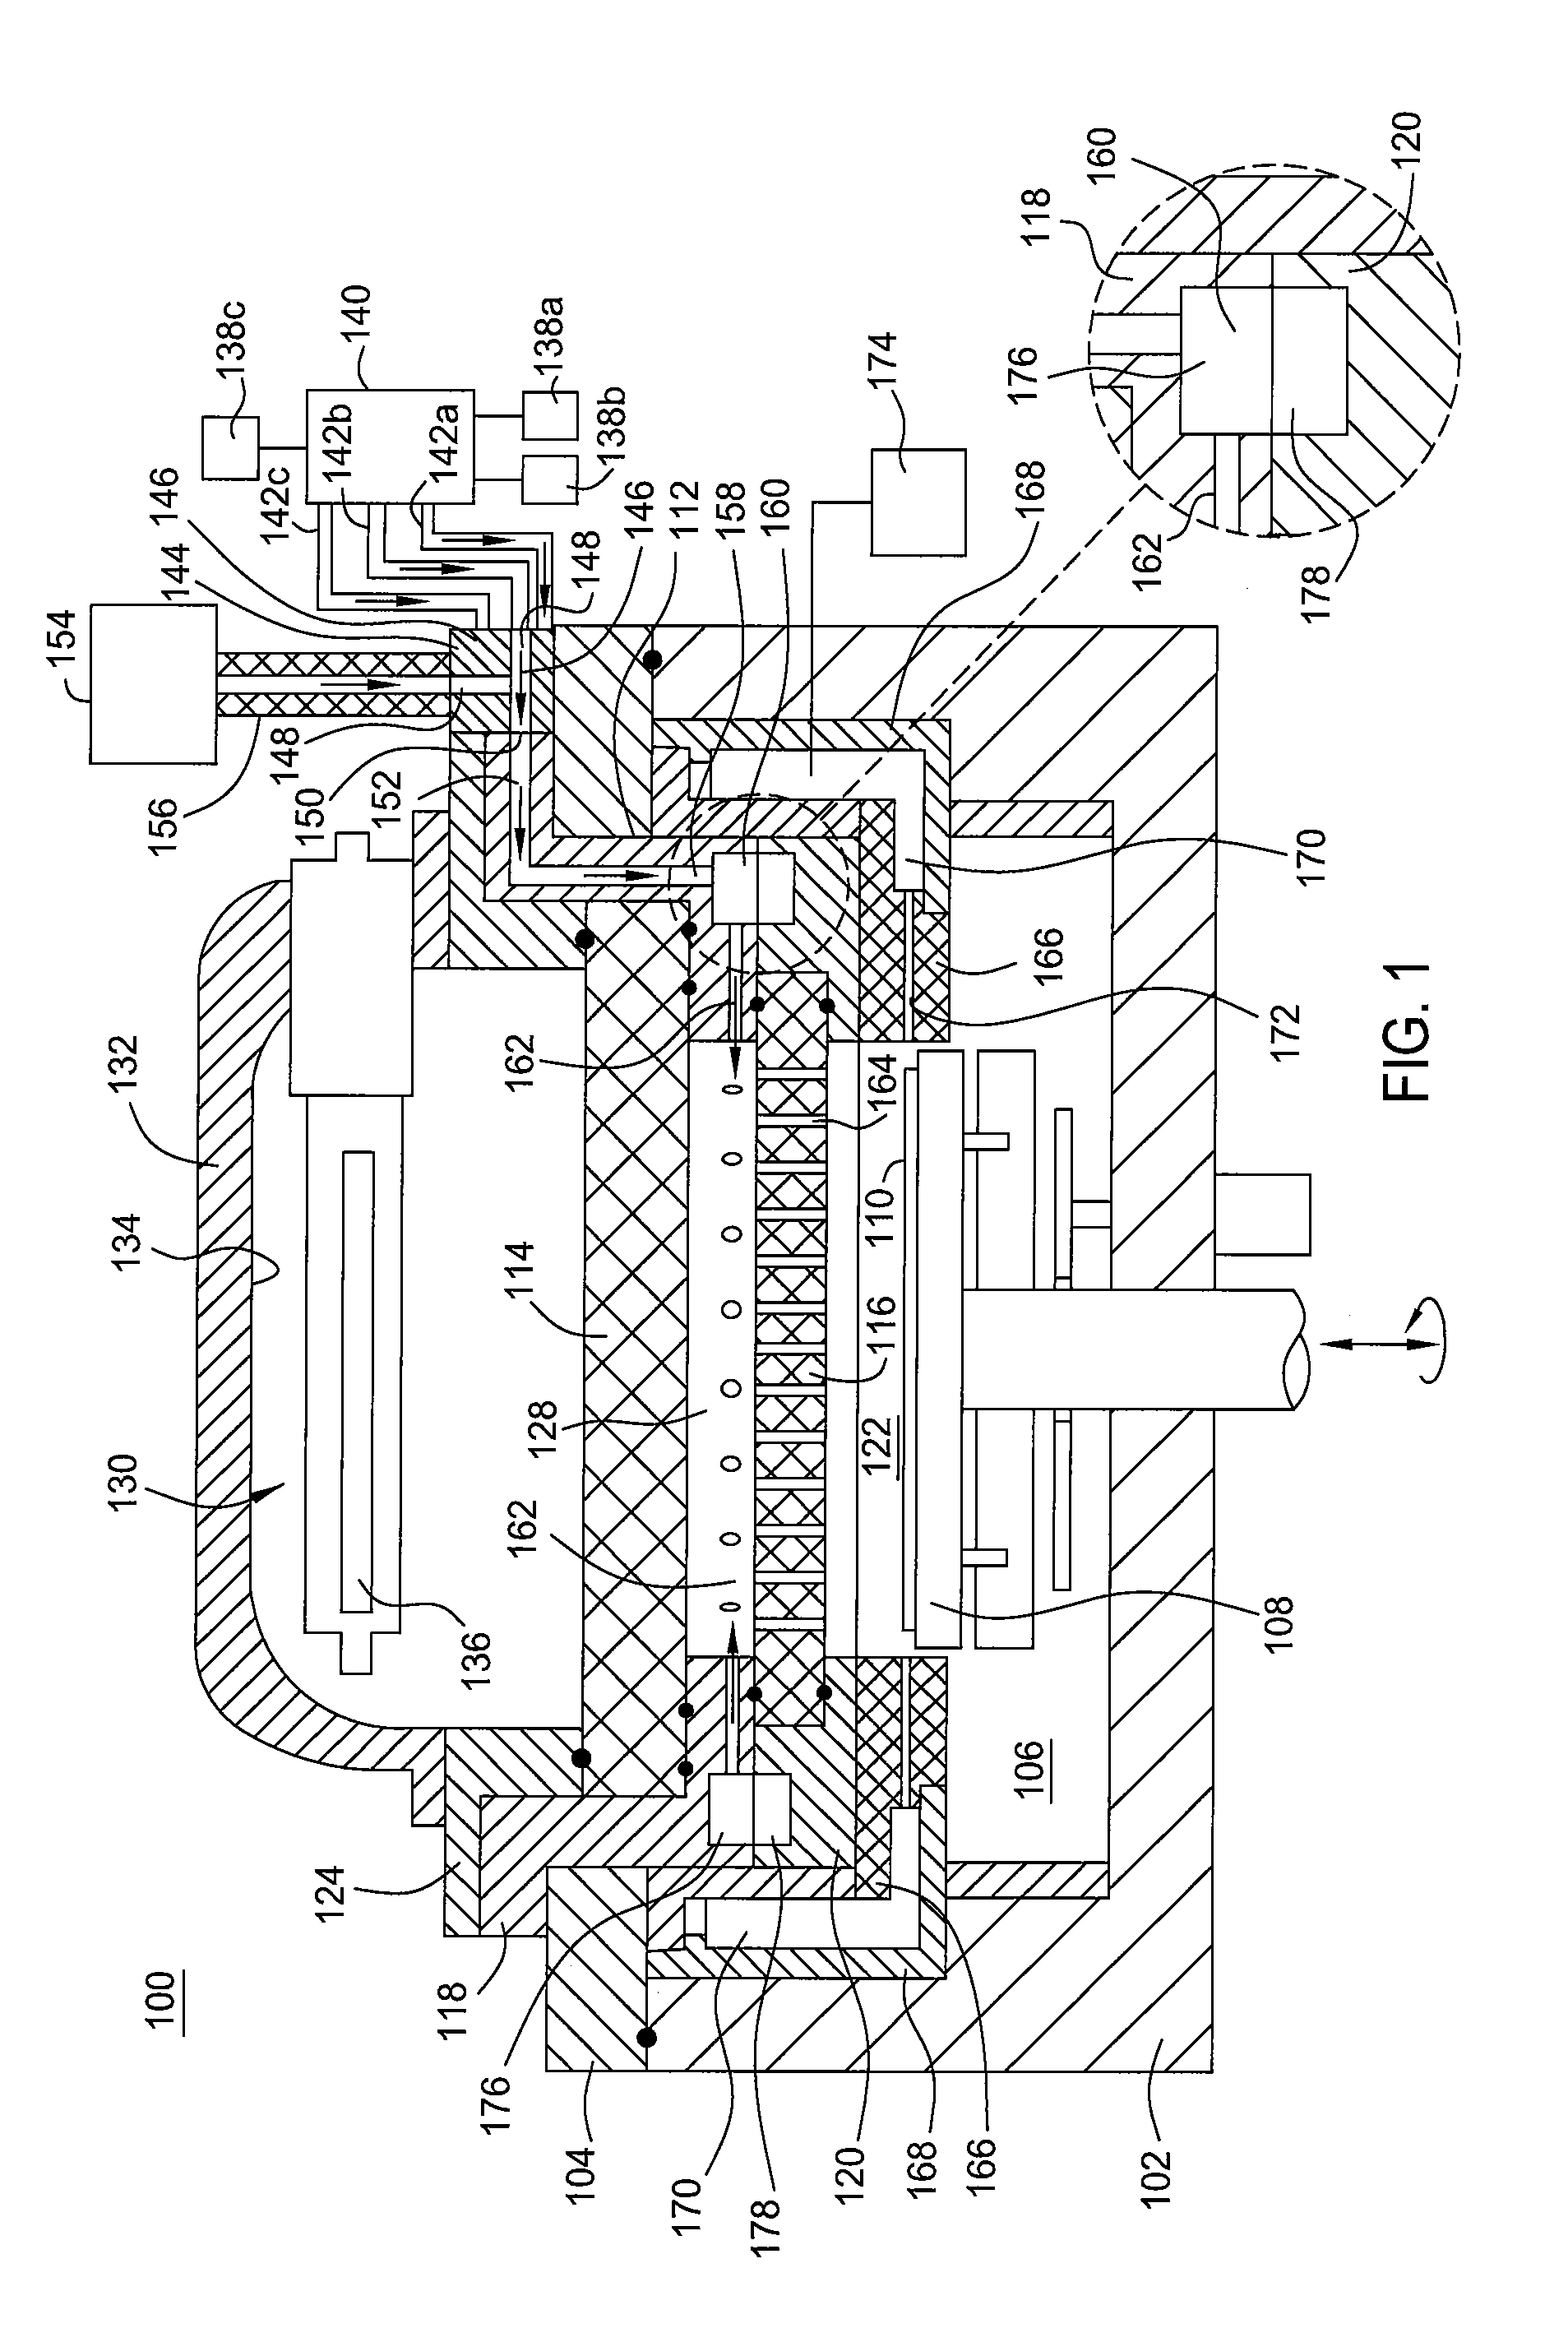 Apparatus and method for UV treatment, chemical treatment, and deposition